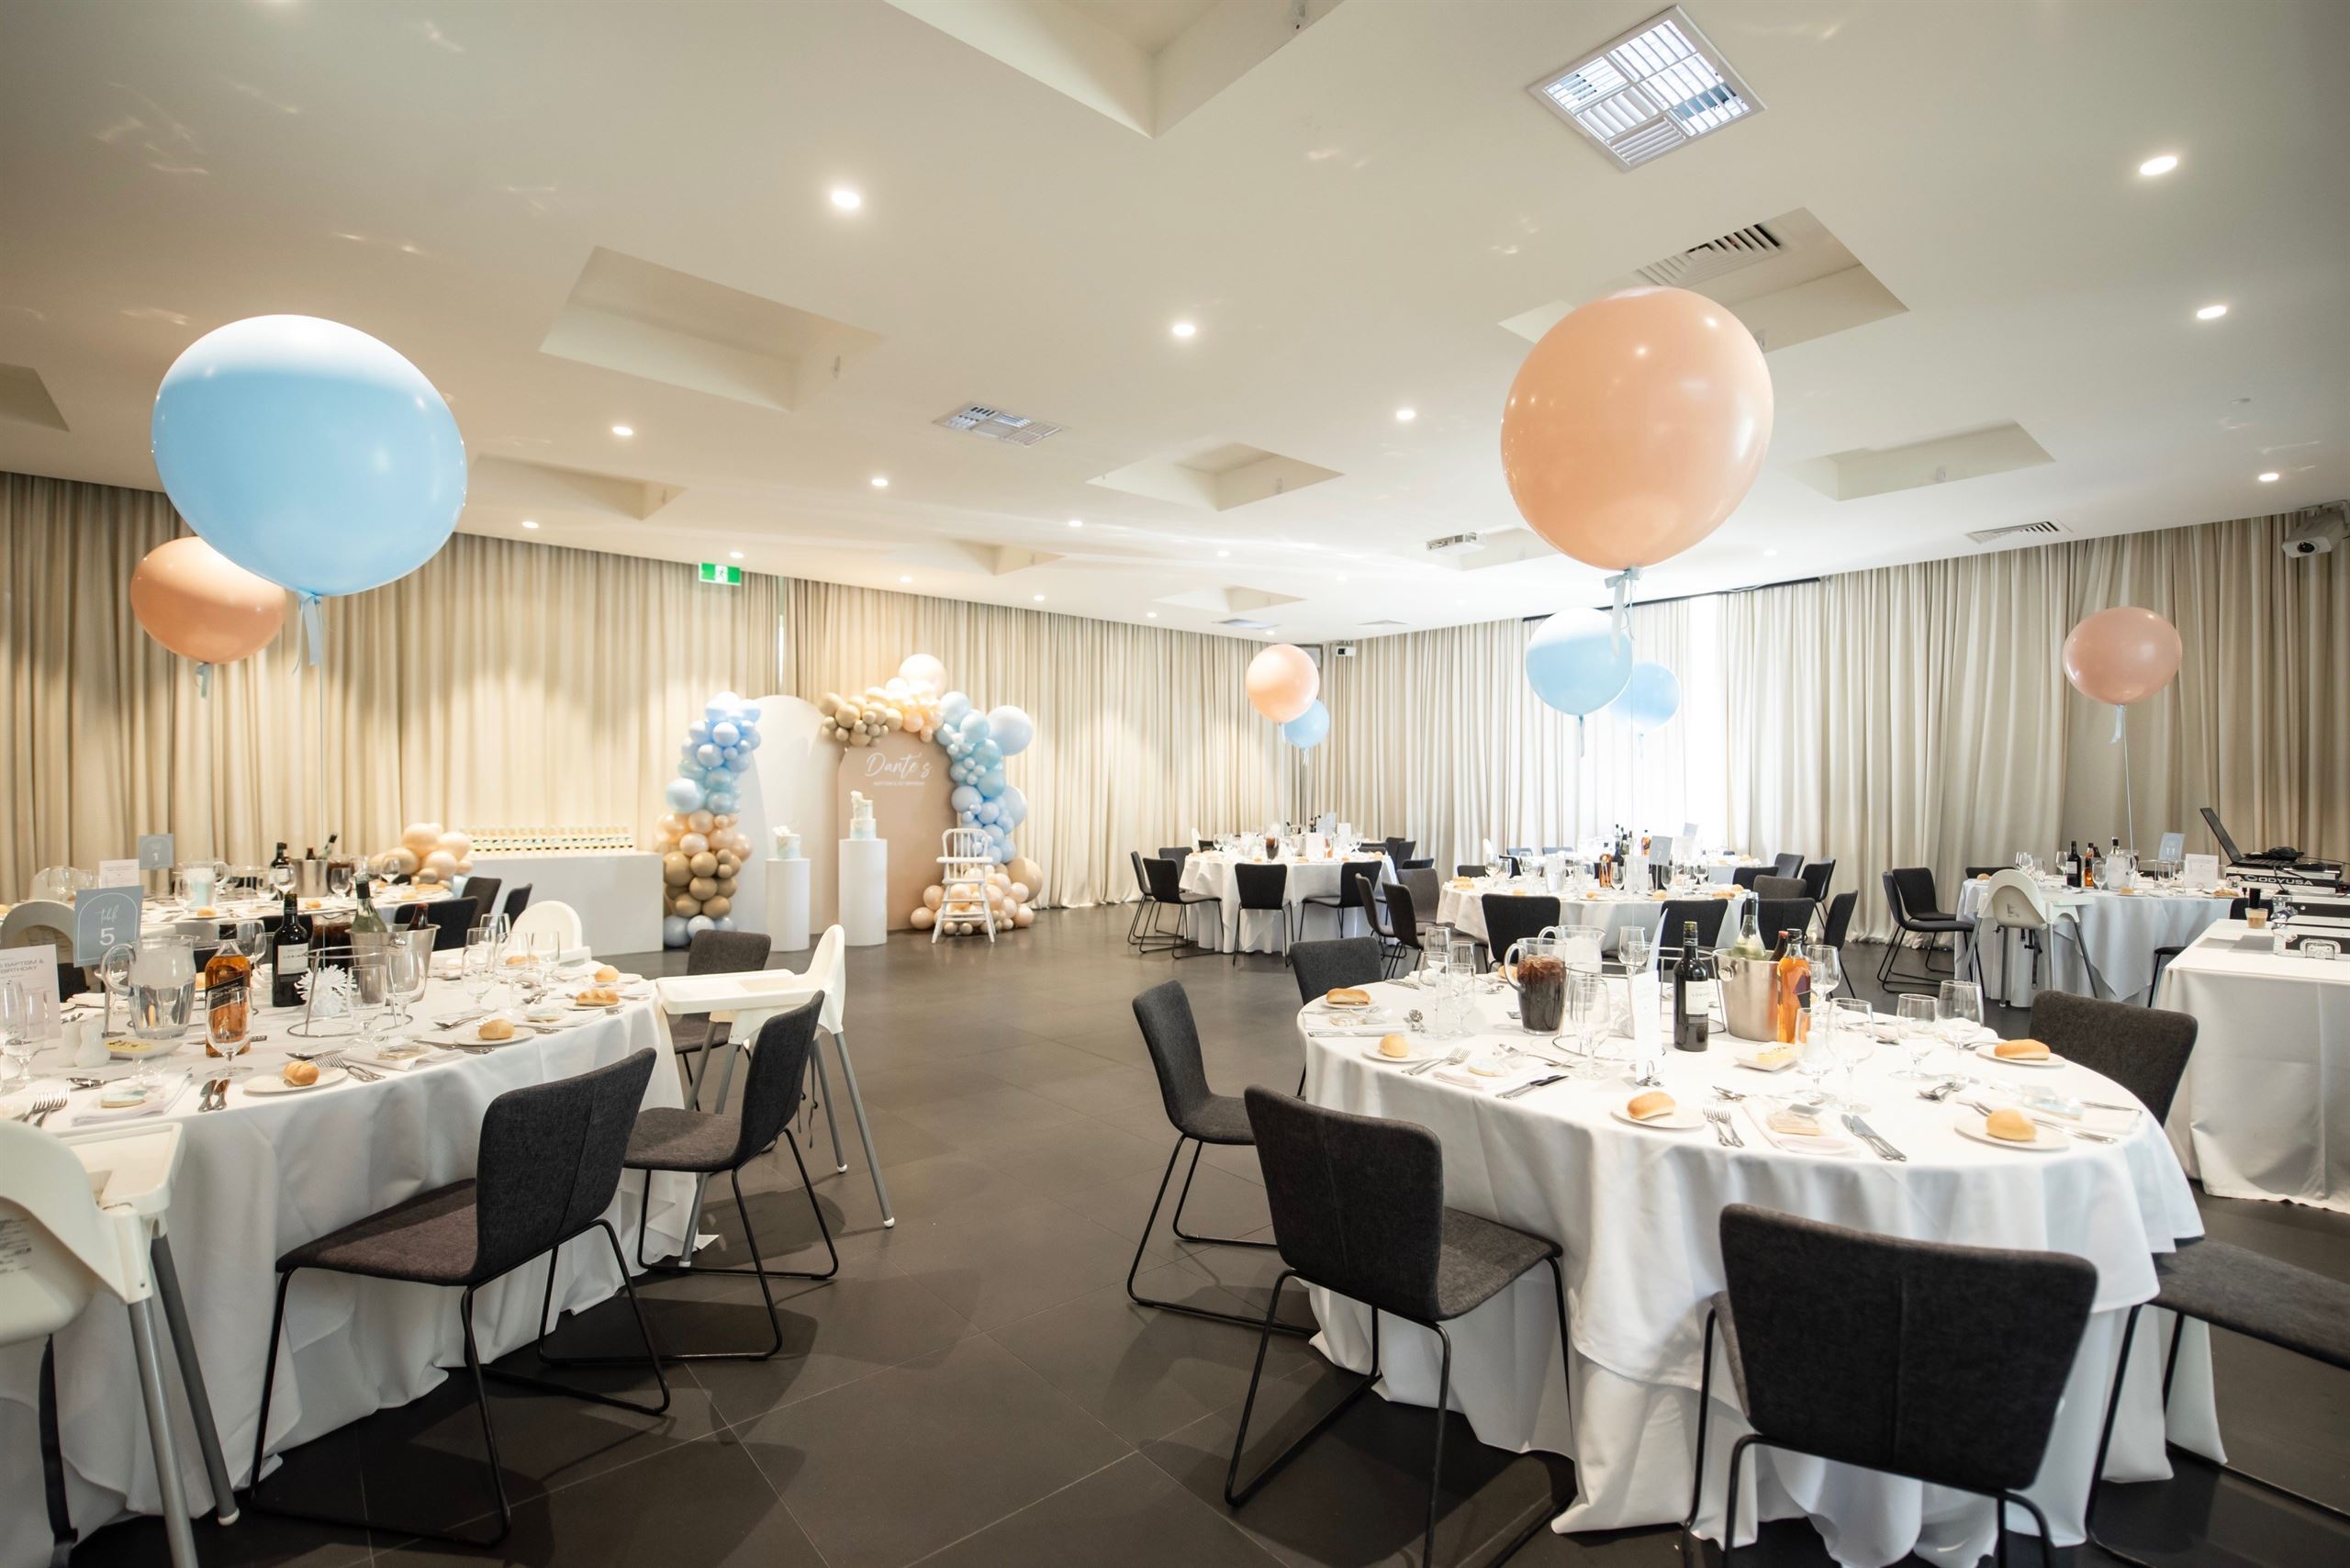 Banquet room with decorated tables and chairs, adorned with balloons. Perfect for Christening Venues in Melbourne.